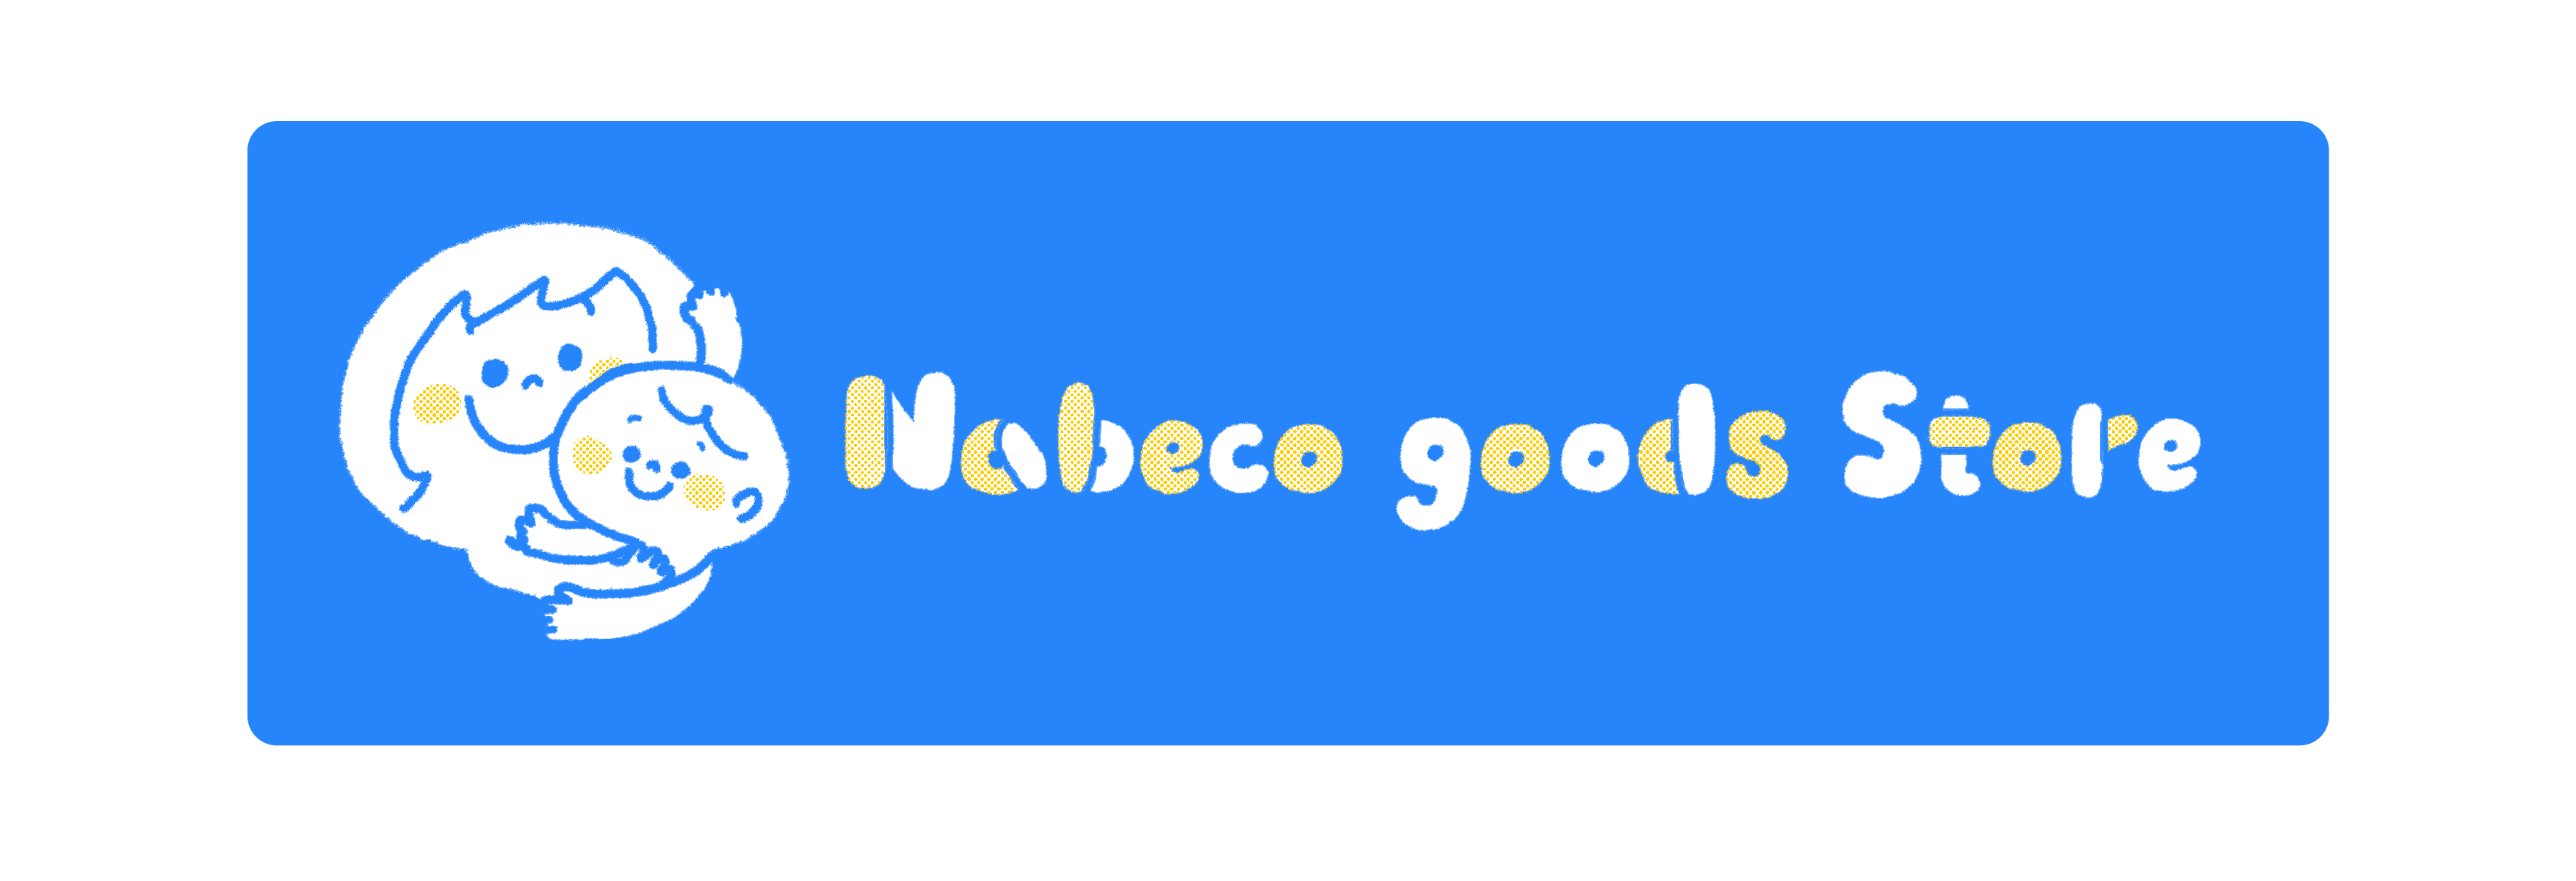 Nabeco goods Store